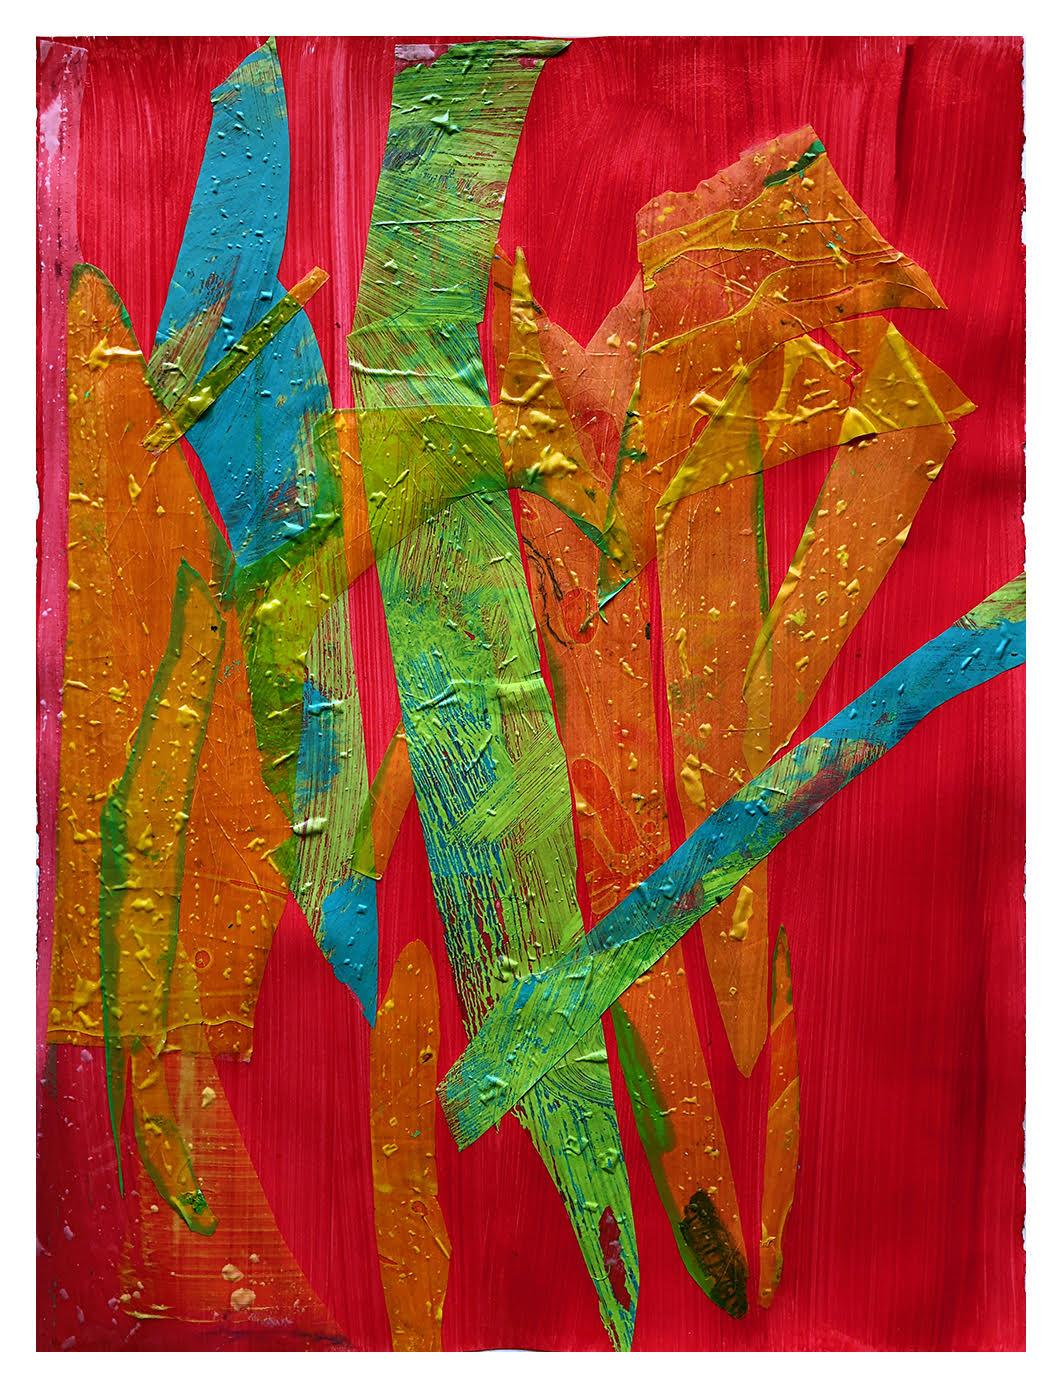 Jeffrey Kurland Landscape Painting - untitled-#1 blue, green, transparent yellow on bright red